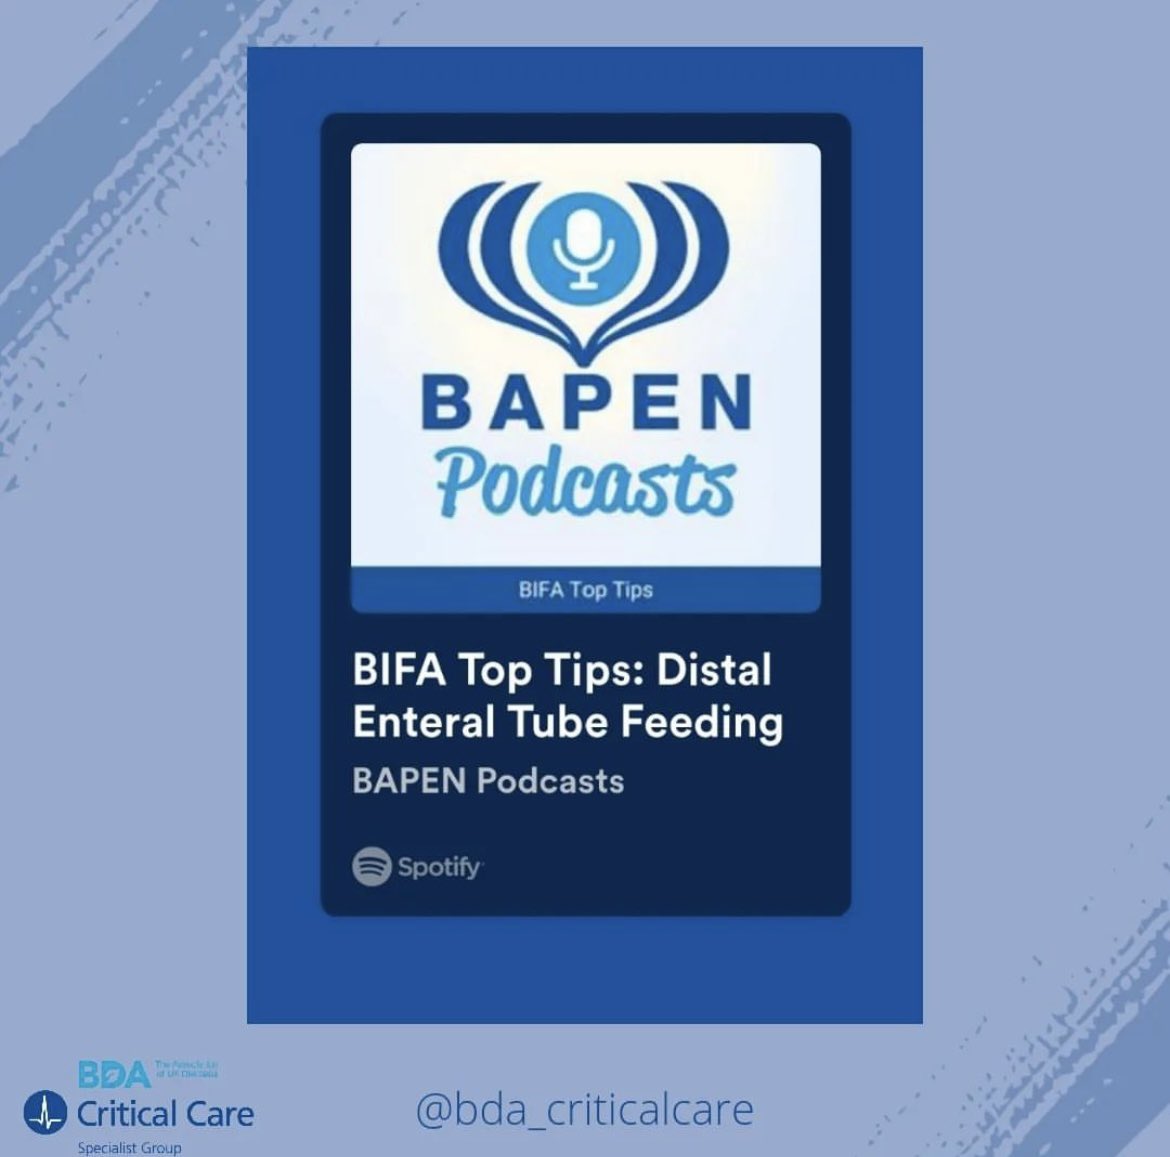 Check out @BAPENUK latest podcast on Distal Enteral Tube Feeding as part of their Intestinal Failure Series 🎙️ Link to listen bit.ly/45Kjopu